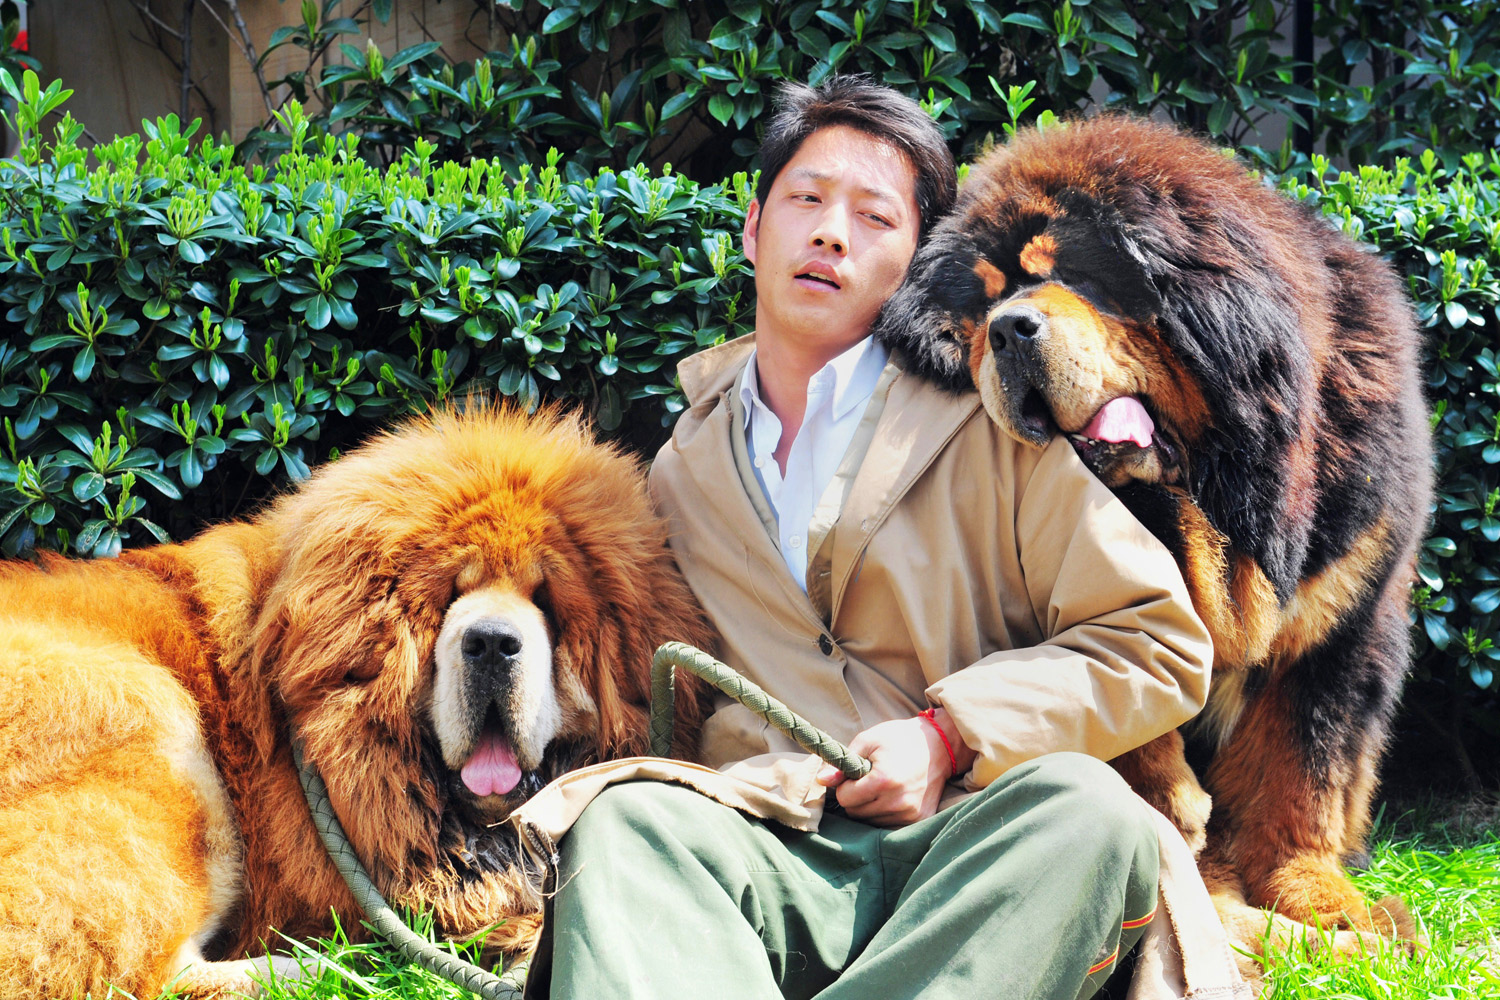 This picture taken on March 18, 2014 shows an unidentified man posing for a photo with two Tibetan mastiffs after they were sold at a 'luxury pet' fair in Hangzhou, in eastern China's Zhejiang province. (STR / AFP / Getty Images)